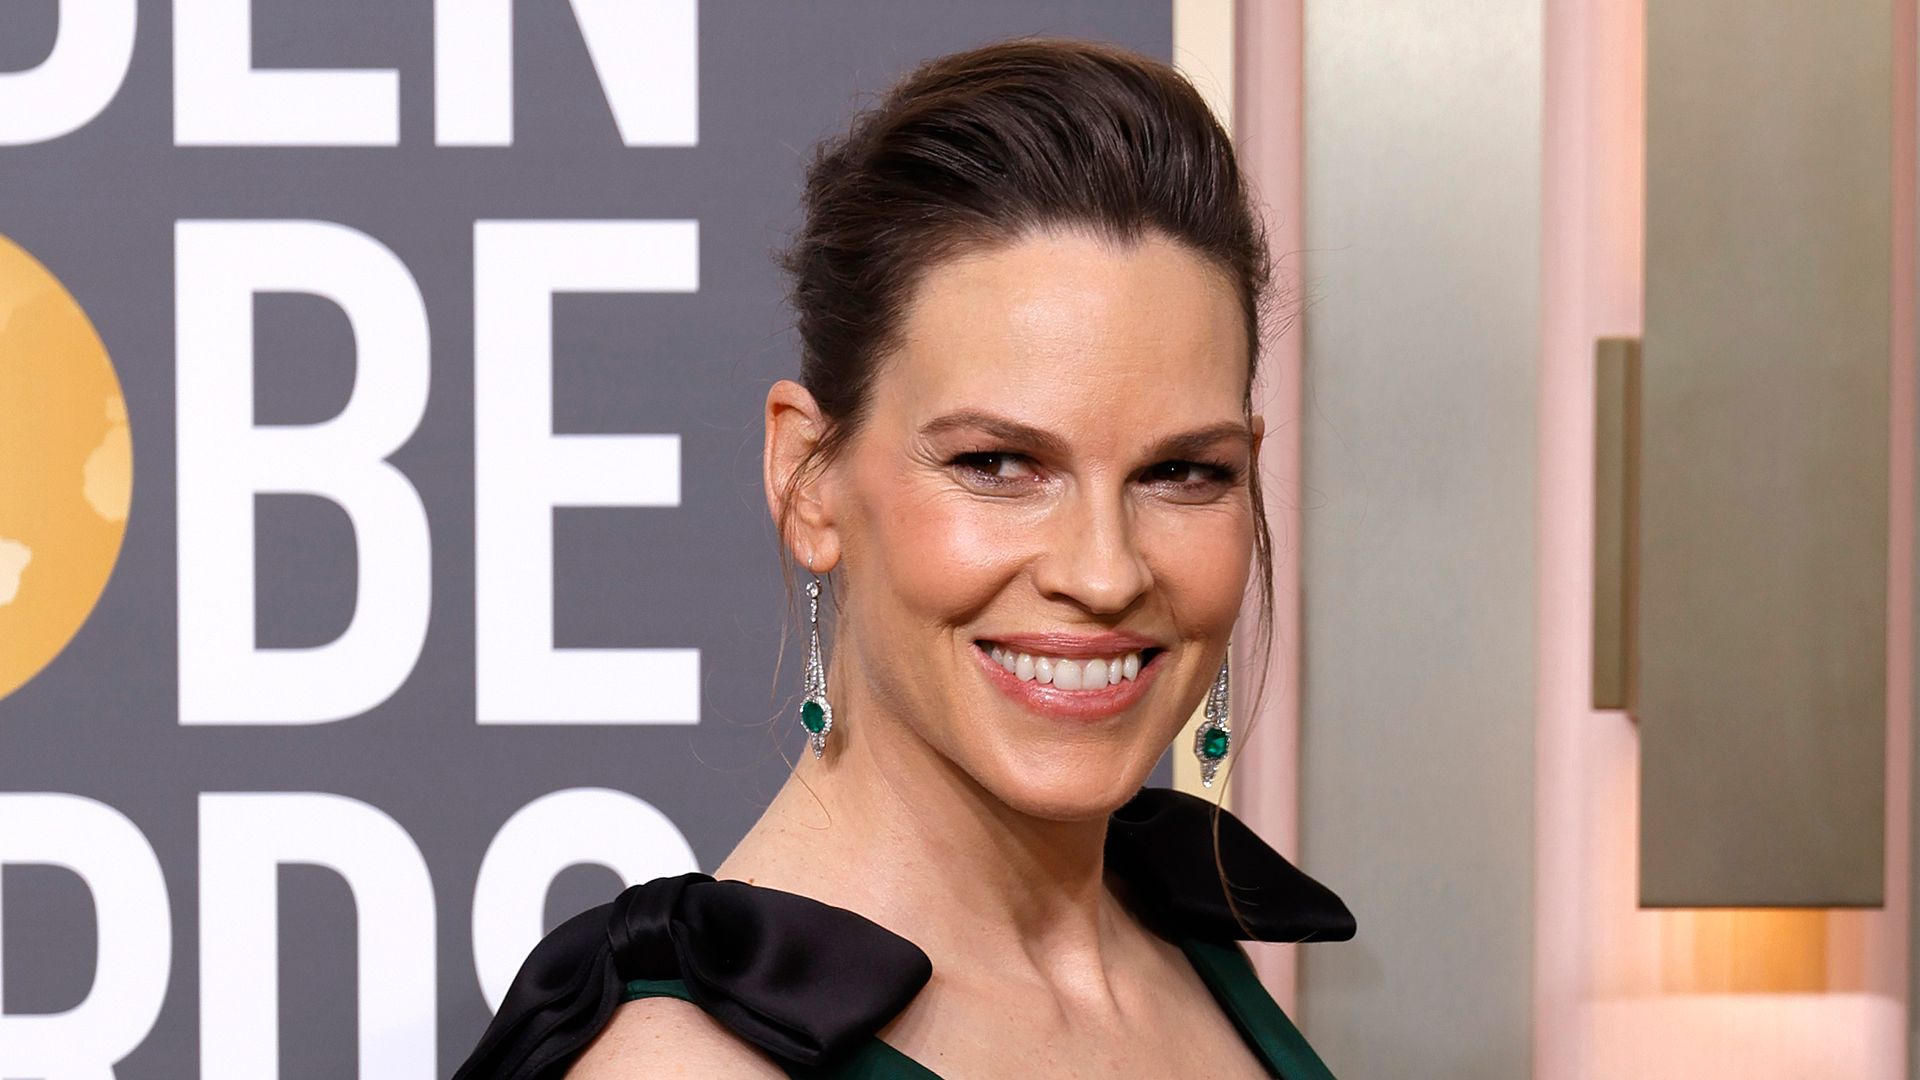 Hilary Swank shares rare glimpse of her twins from day in the park